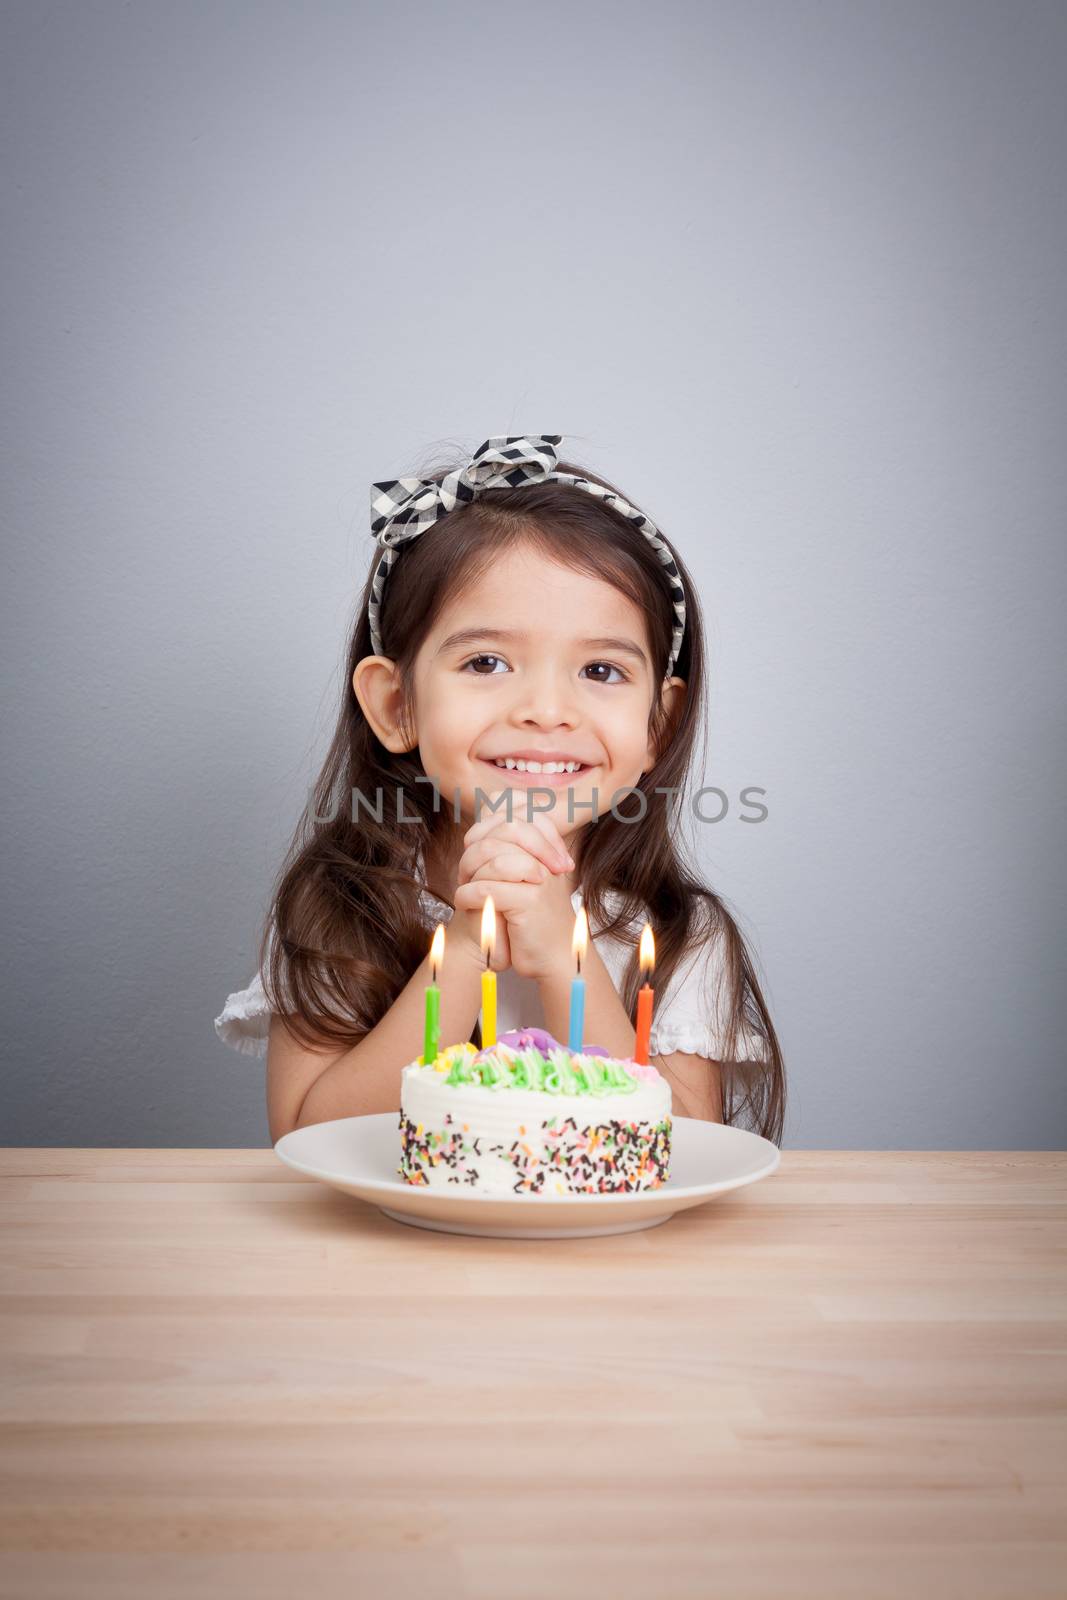 cute girl make a wish on birthday. Happy Birthday background. Greeting background for card, flyer, poster, sign, banner, web, postcard, invitation. Abstract background for text, type, quote